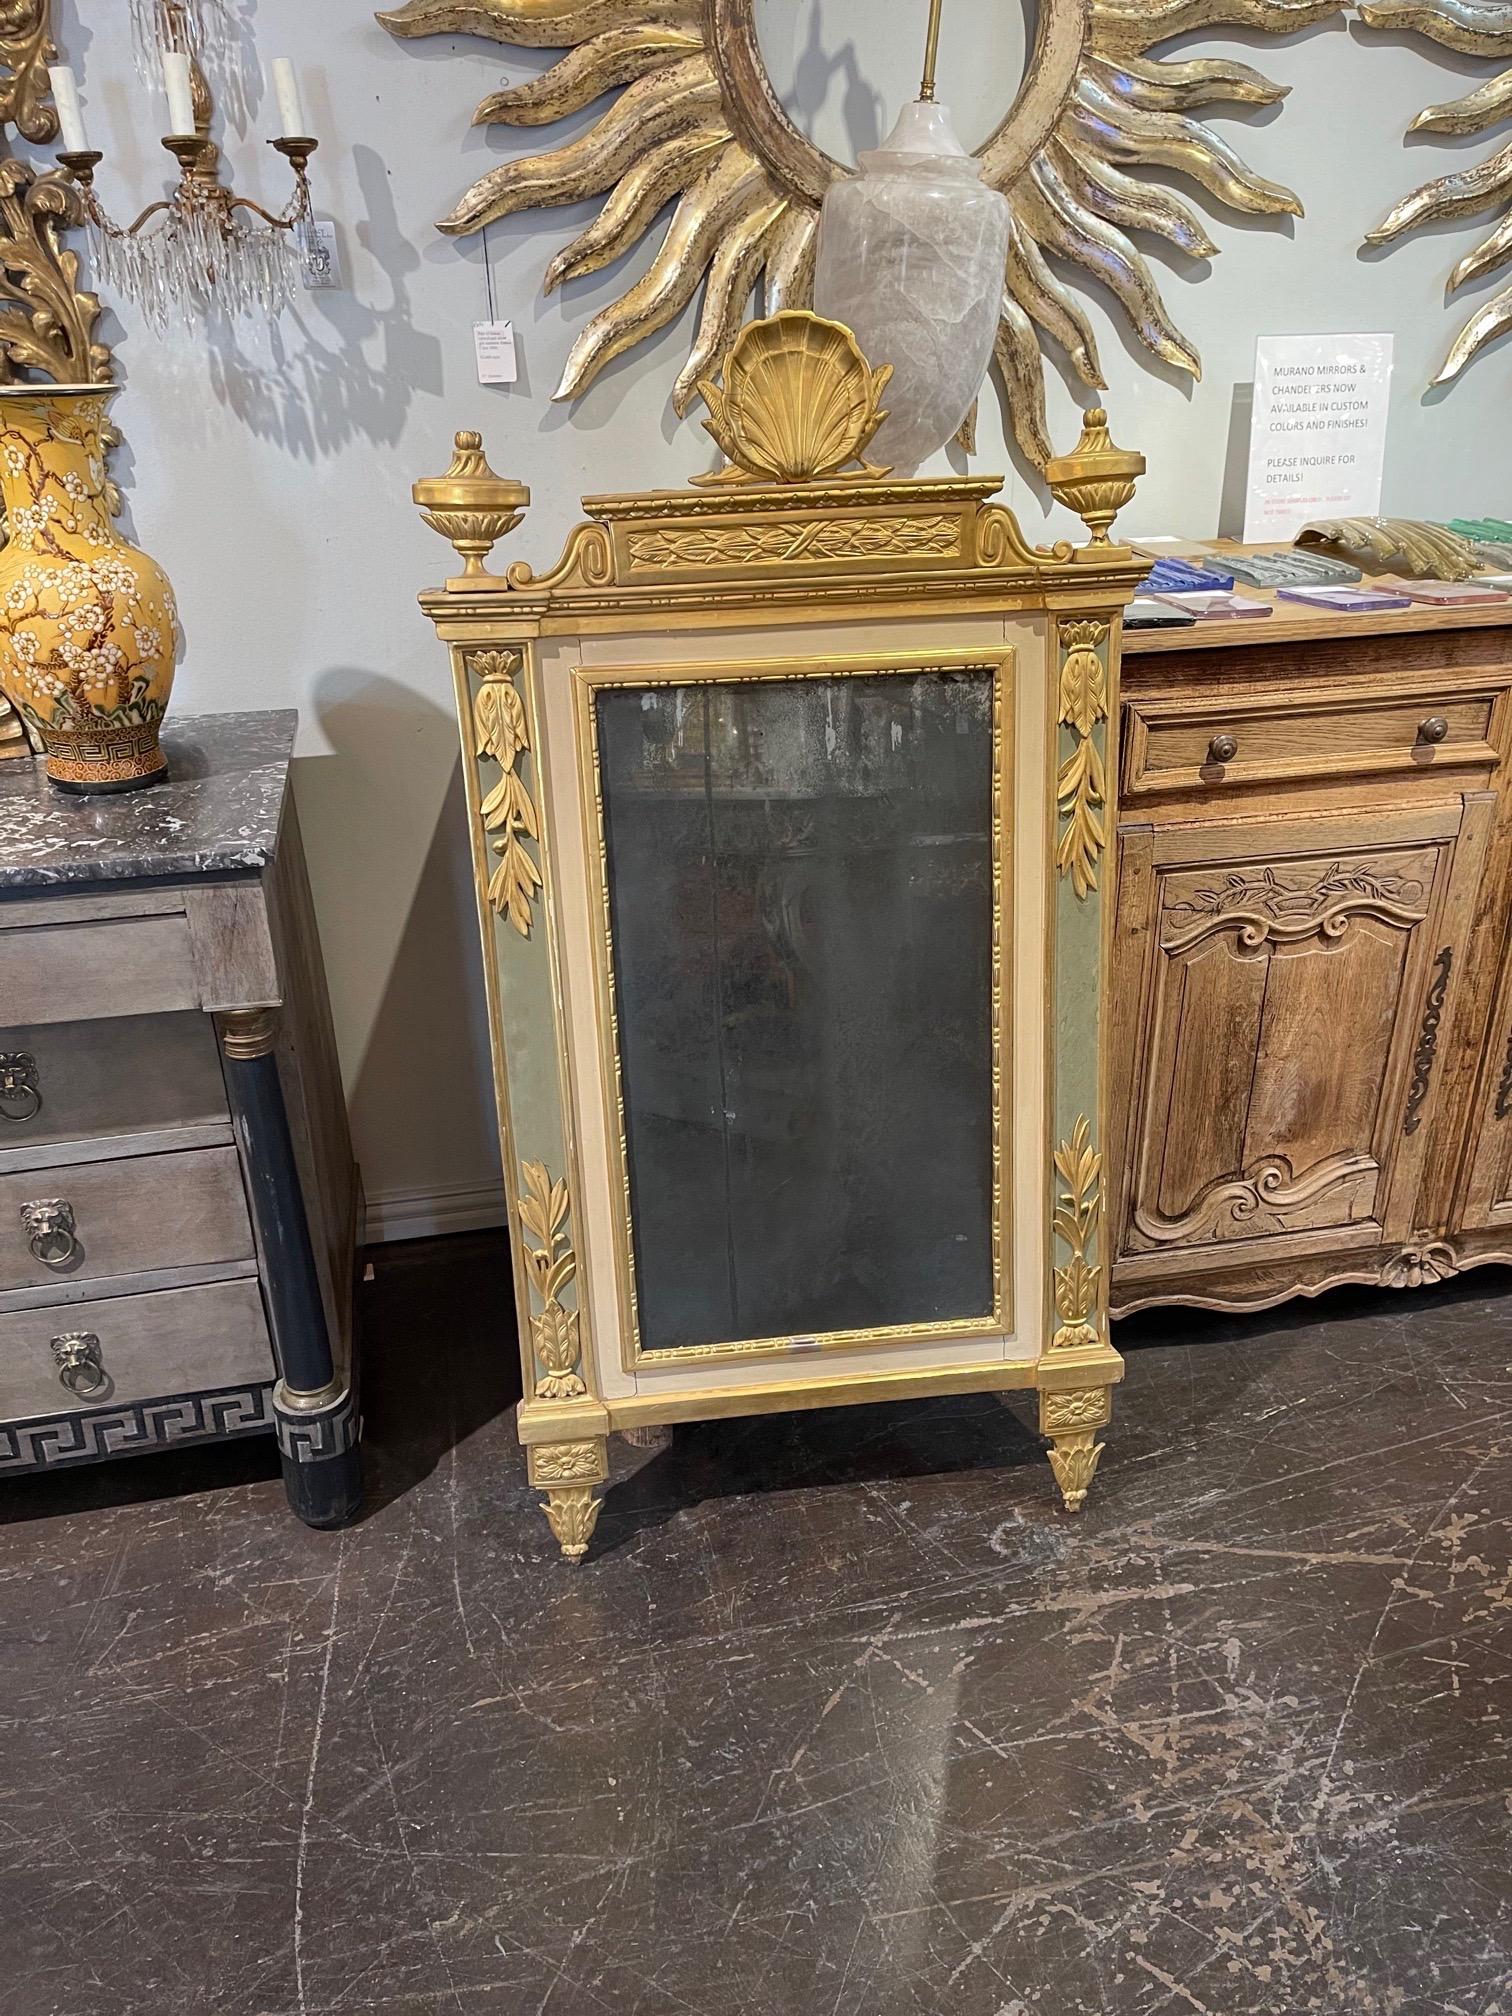 Superb 18th century Italian carved and parcel gilt mirror with original glass. Beautiful carvings including finials, floral images and a crown at the top. Painted in a pretty green and crème. Stunning!!